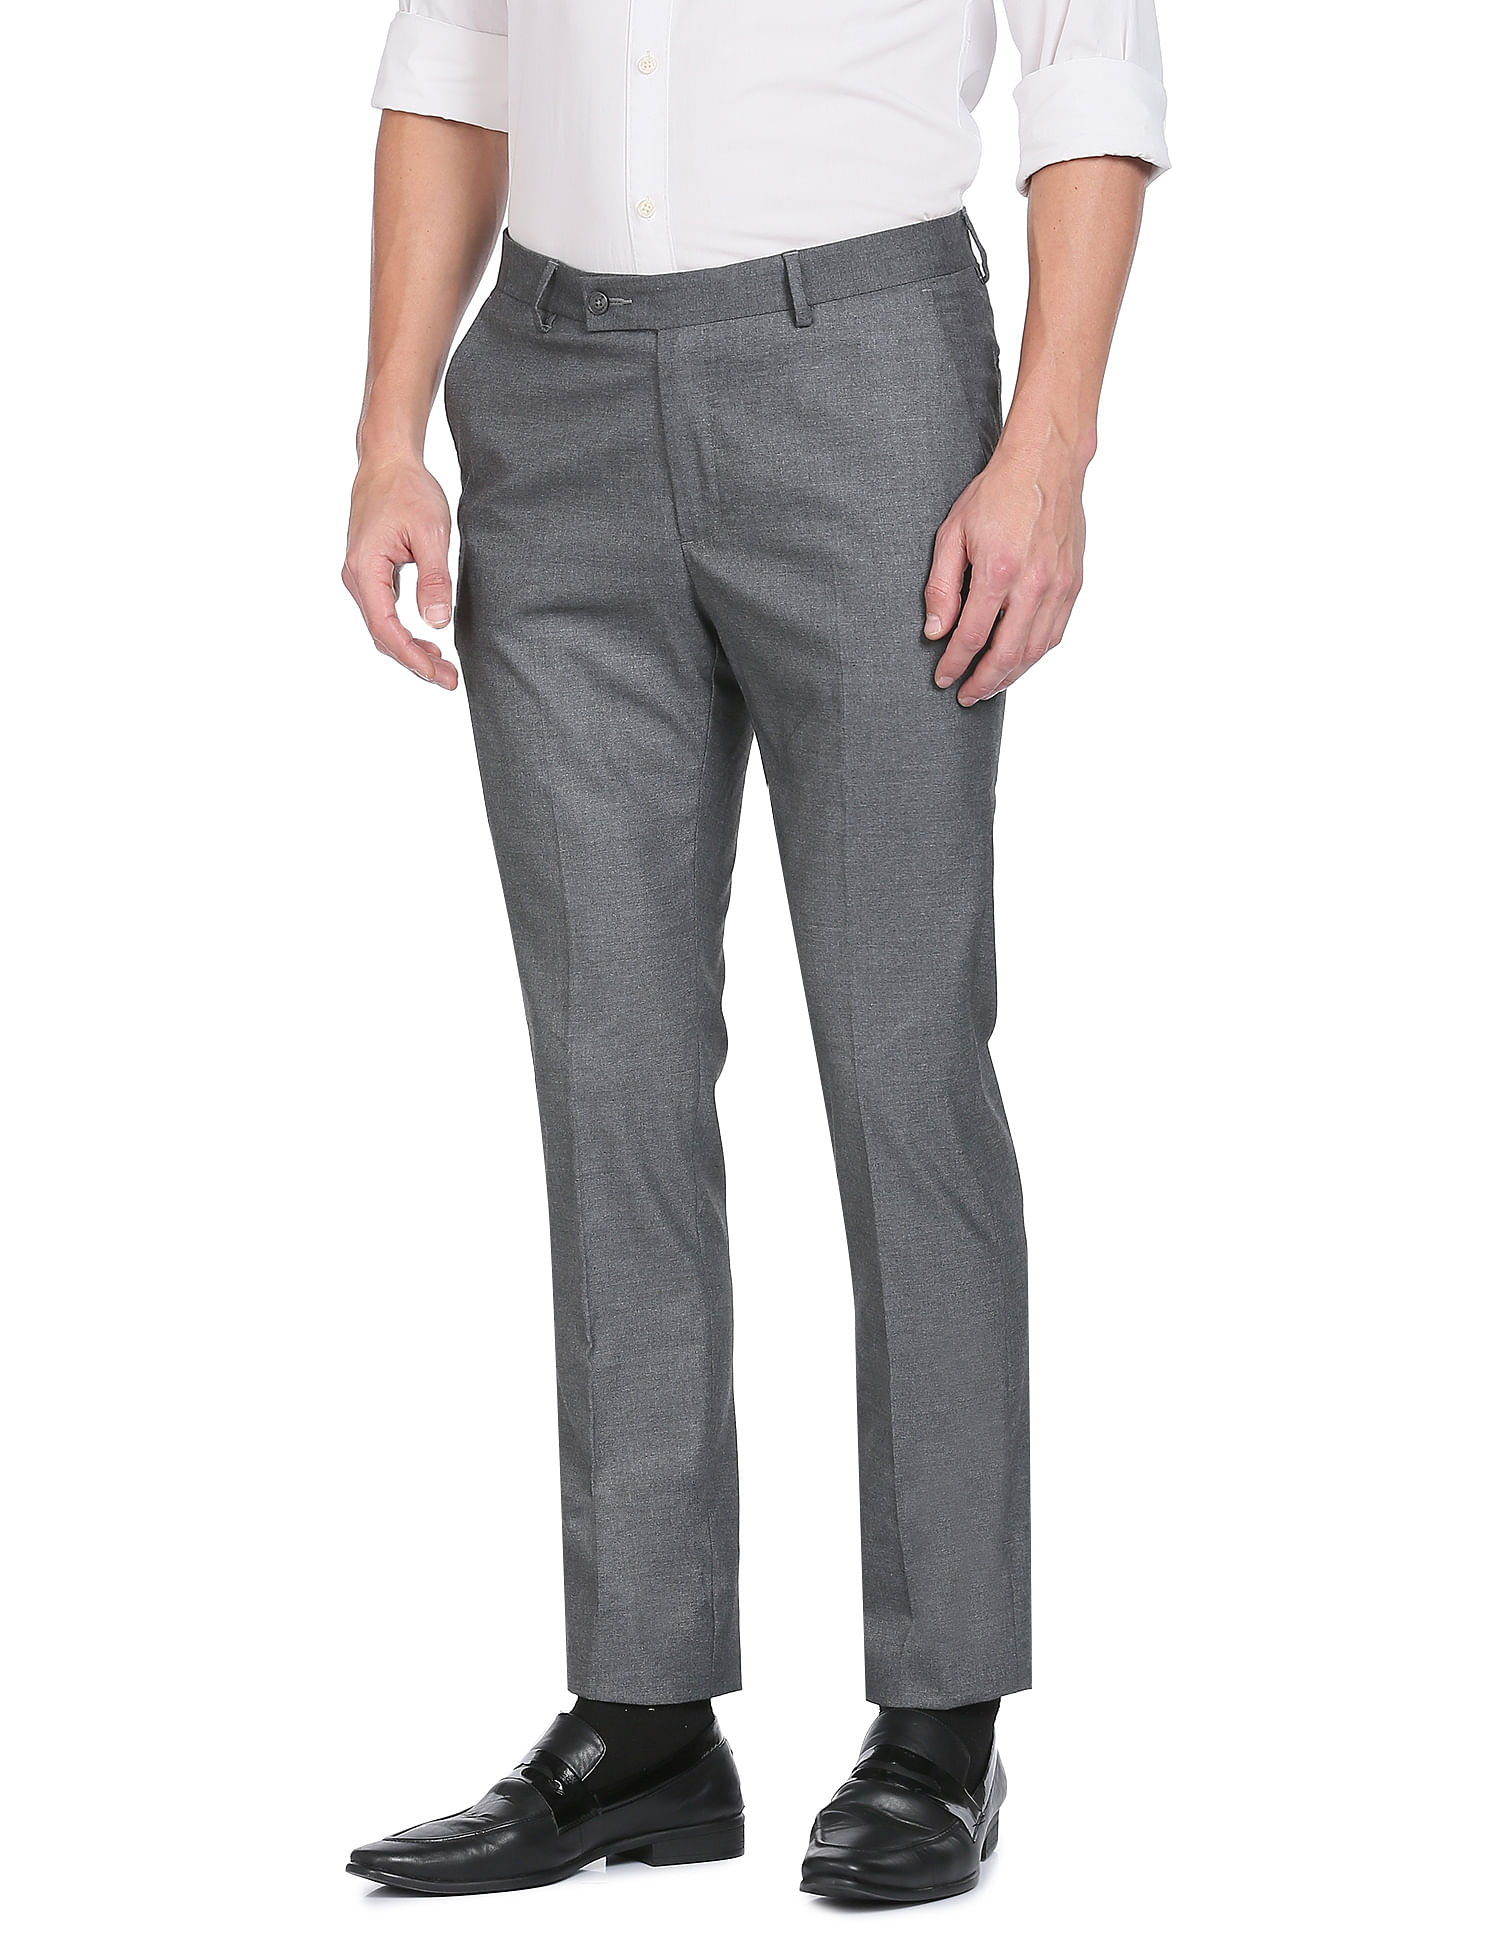 Buy Navy Blue Trousers & Pants for Men by Marks & Spencer Online | Ajio.com